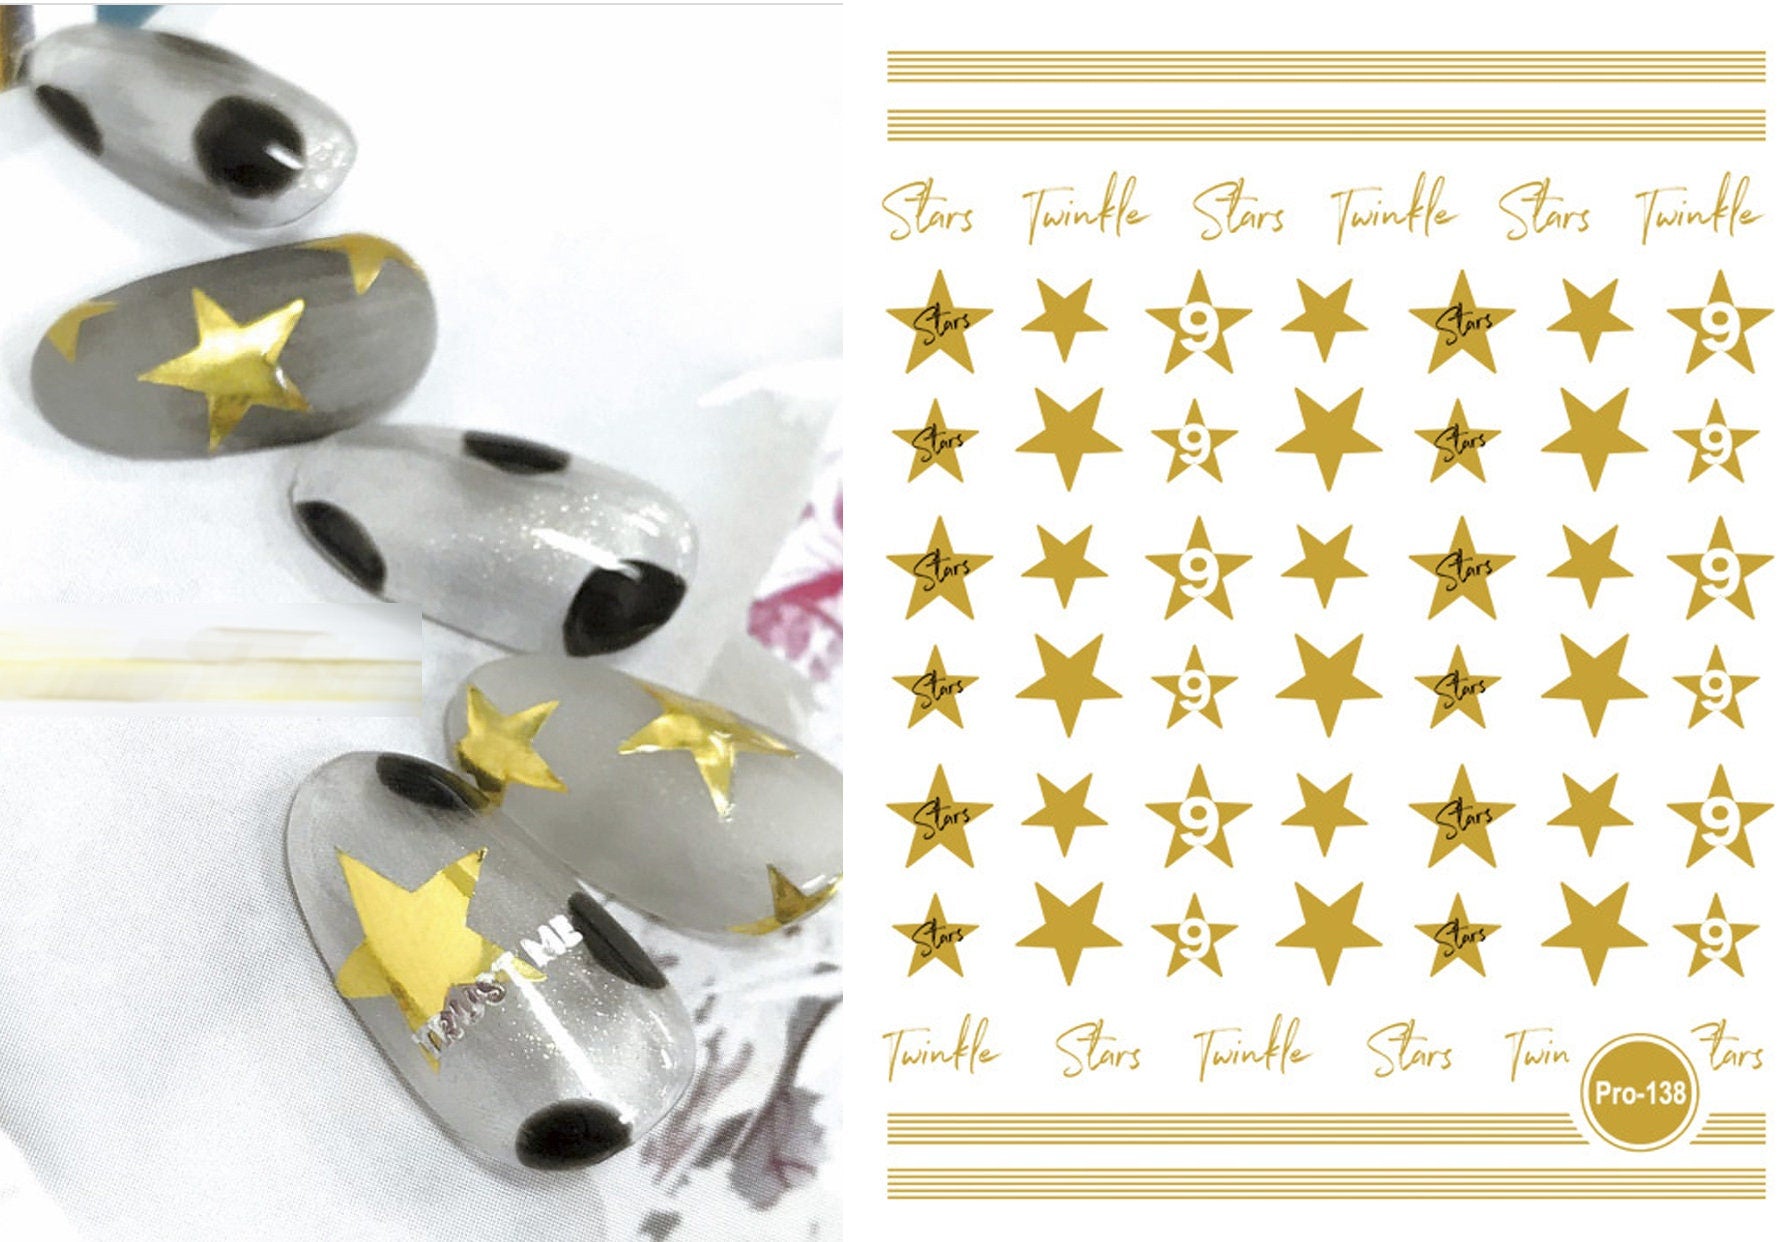 Ultra Thin Star Nail Sticker/ Gold Silver Five Pointed Star Nail Art Stickers Self Adhesive Decals/ Metallic star pro nail art sticker